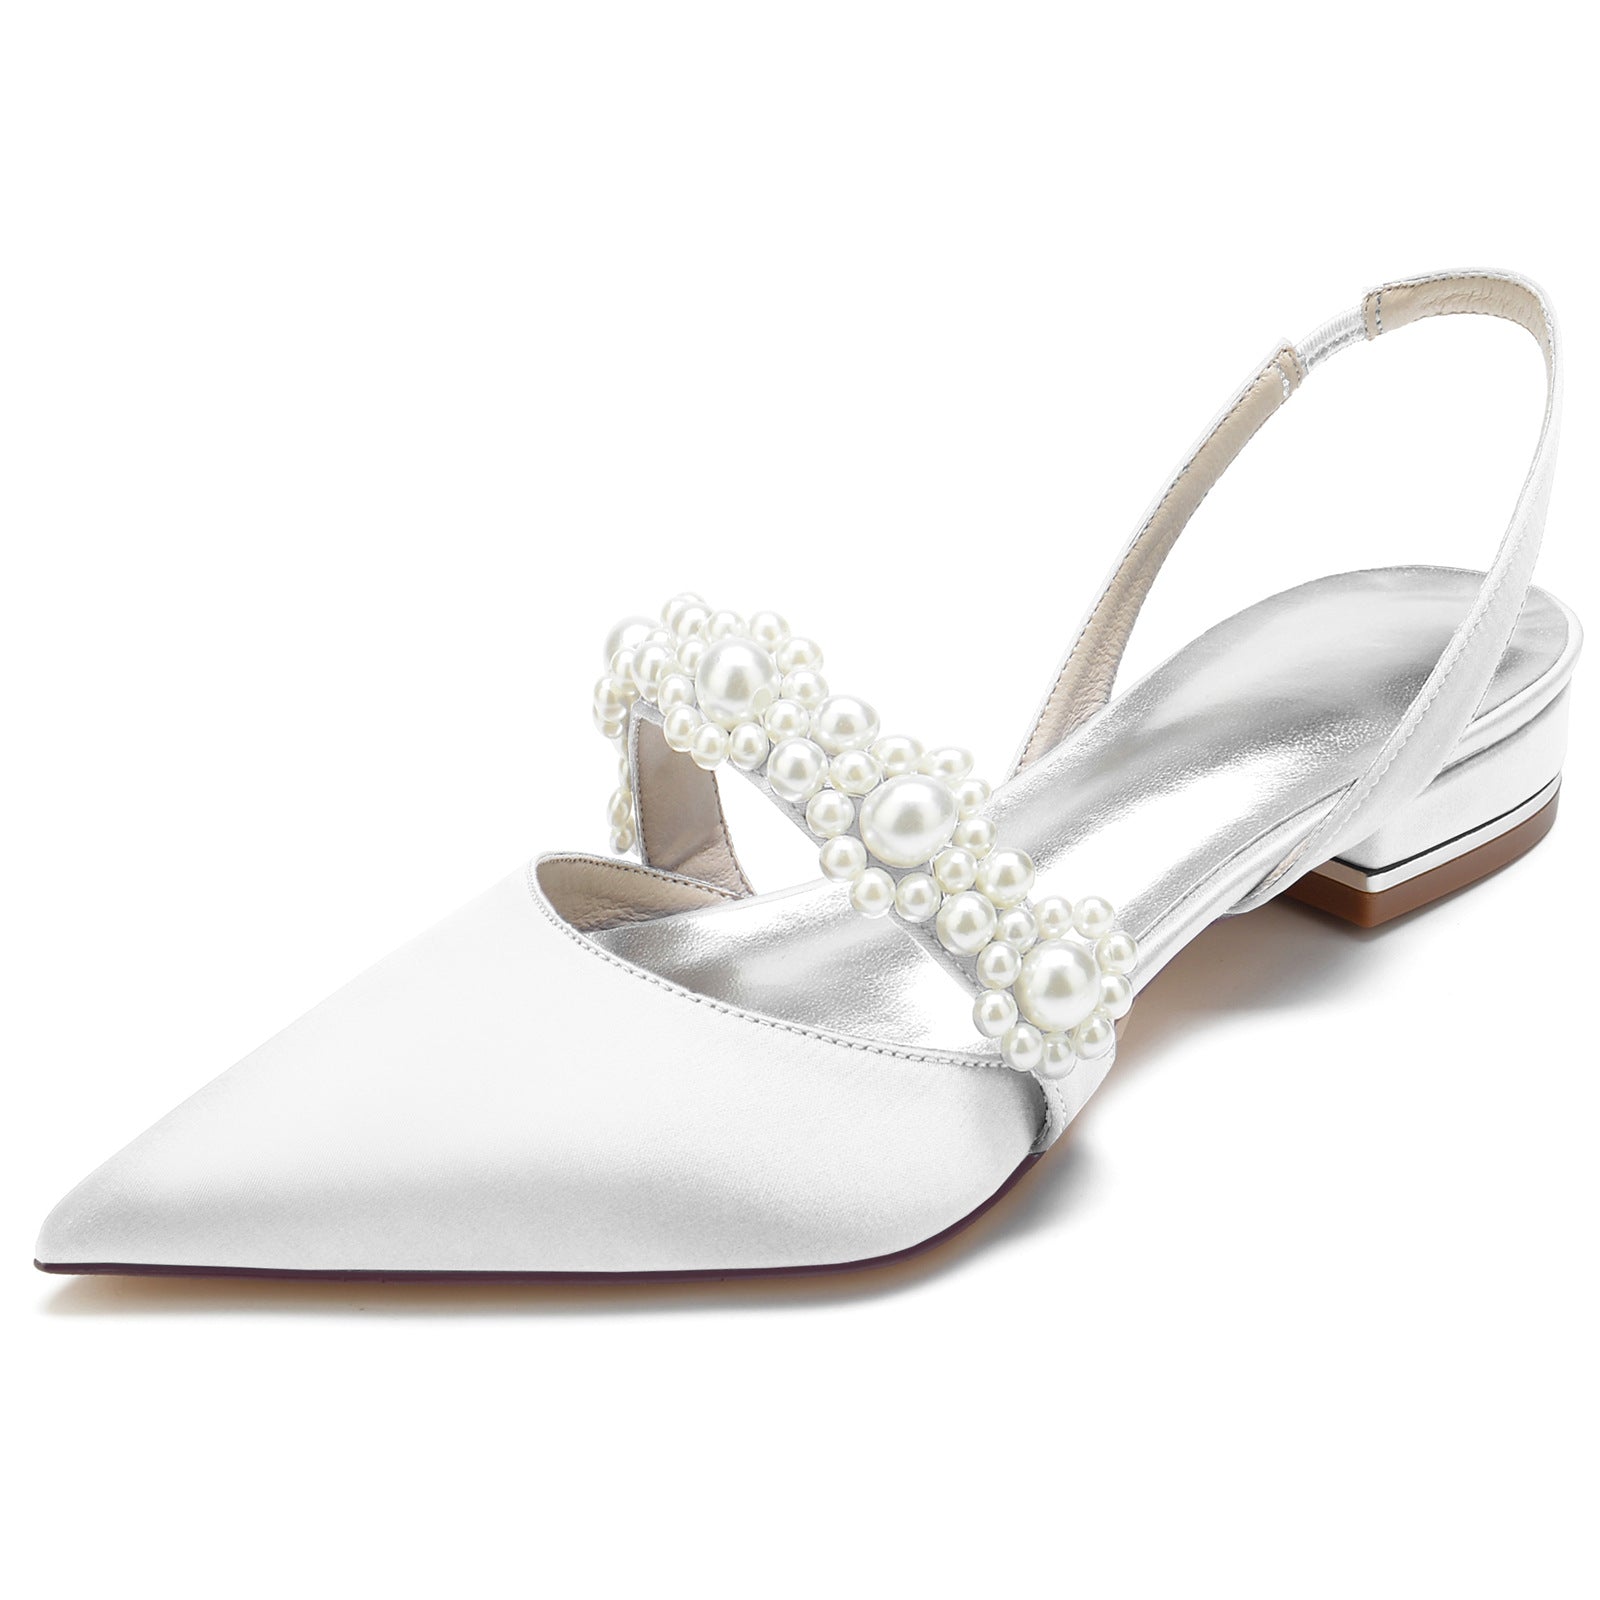 Elegant satin bridal sandals white pearls strap pointed closed toe sandals for party